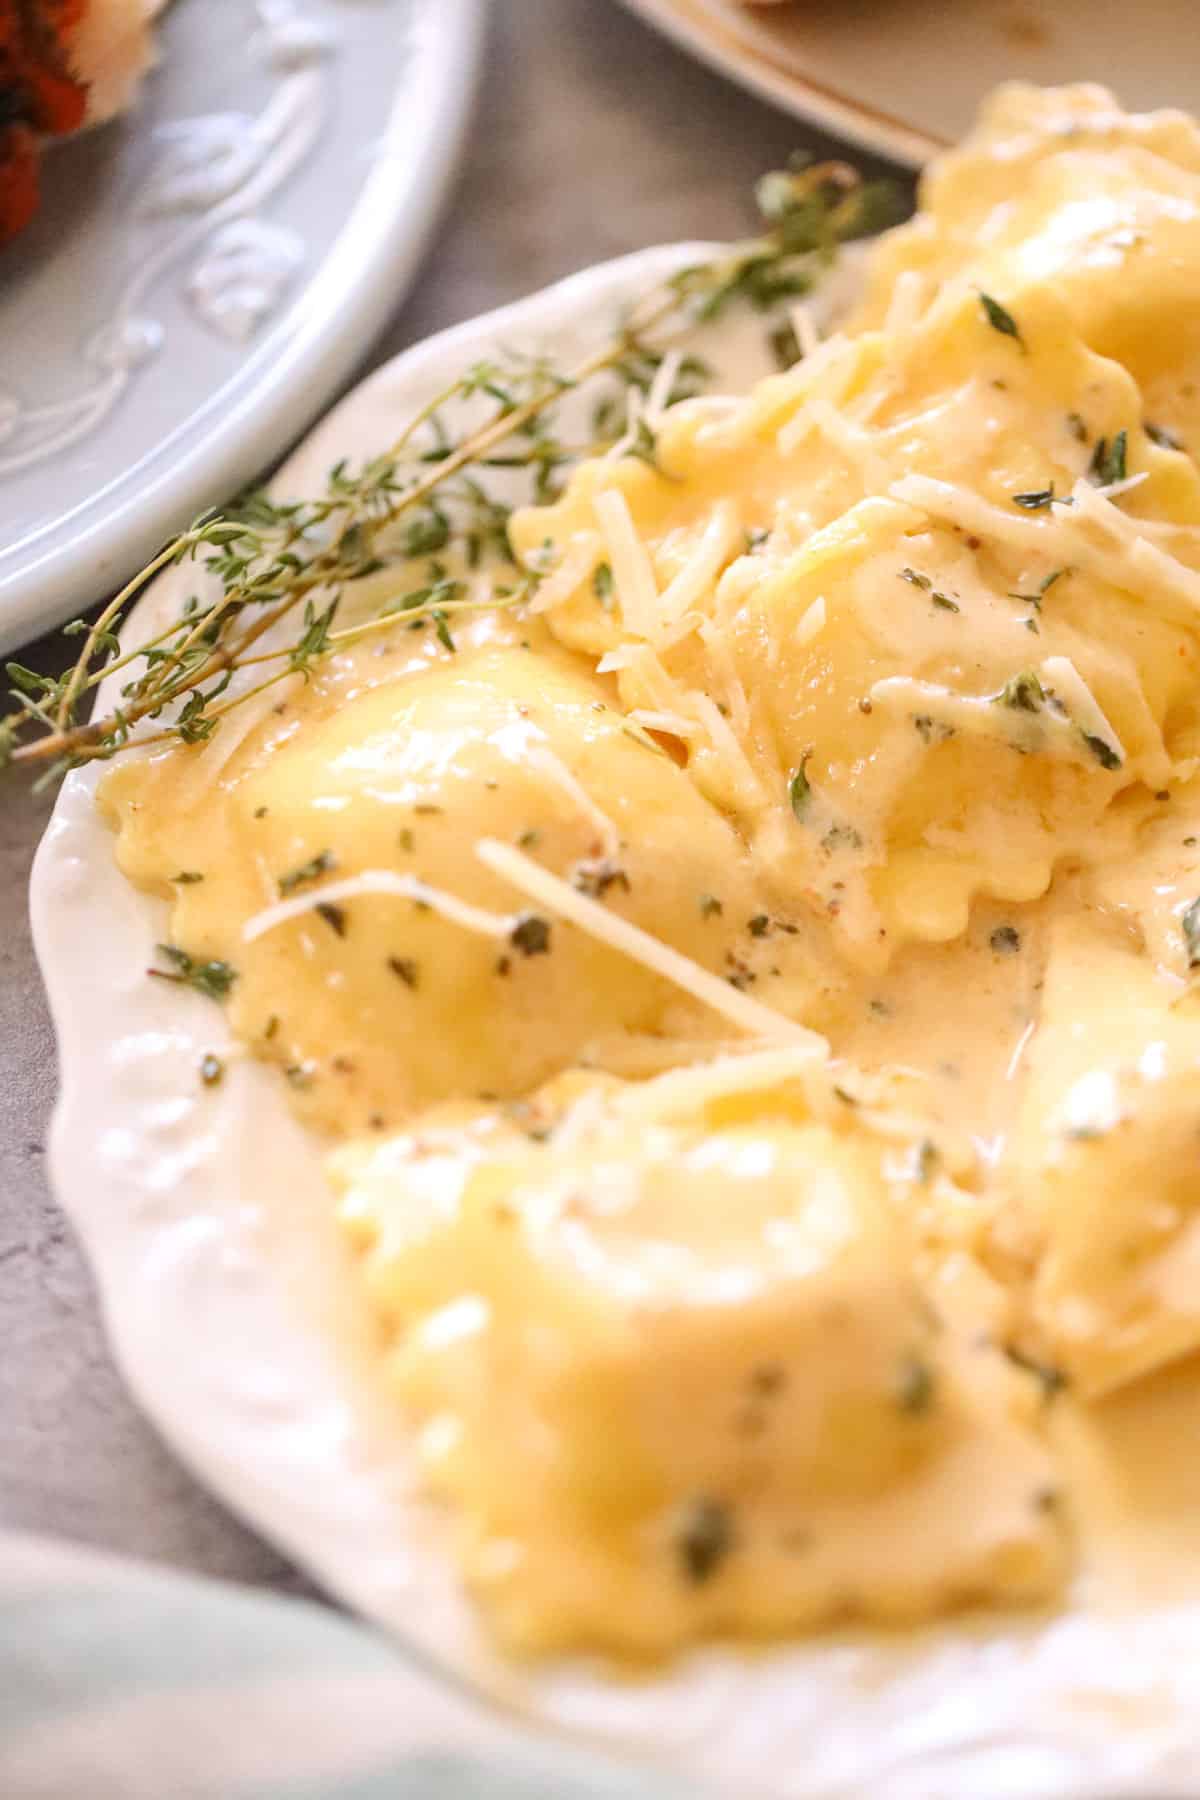 ravioli smothered in creamy sauce with parsley